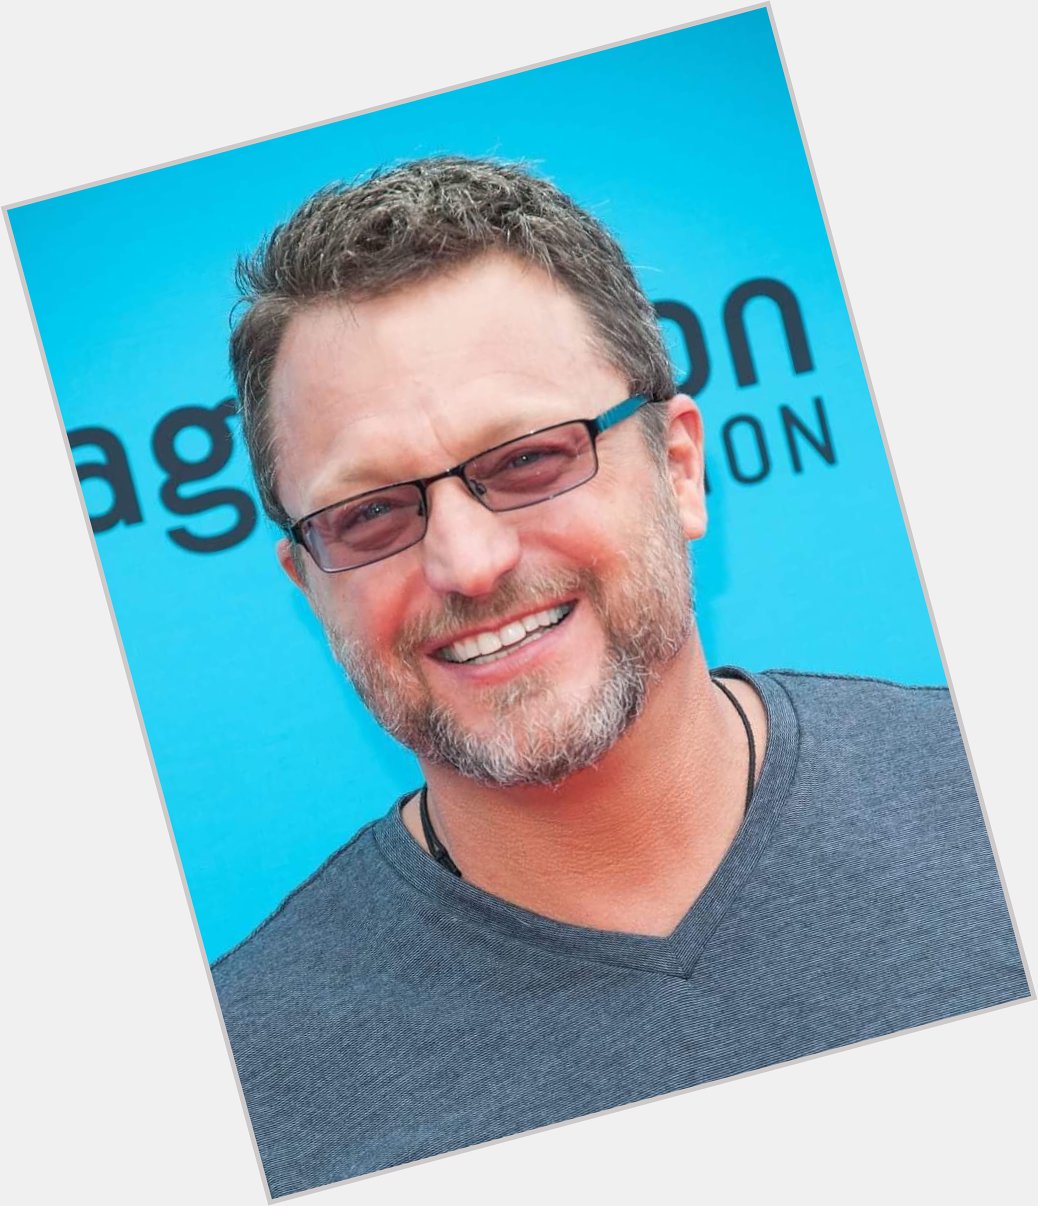 Happy 59th birthday to our friend and former SFOTR12 guest; Steven Blum! 